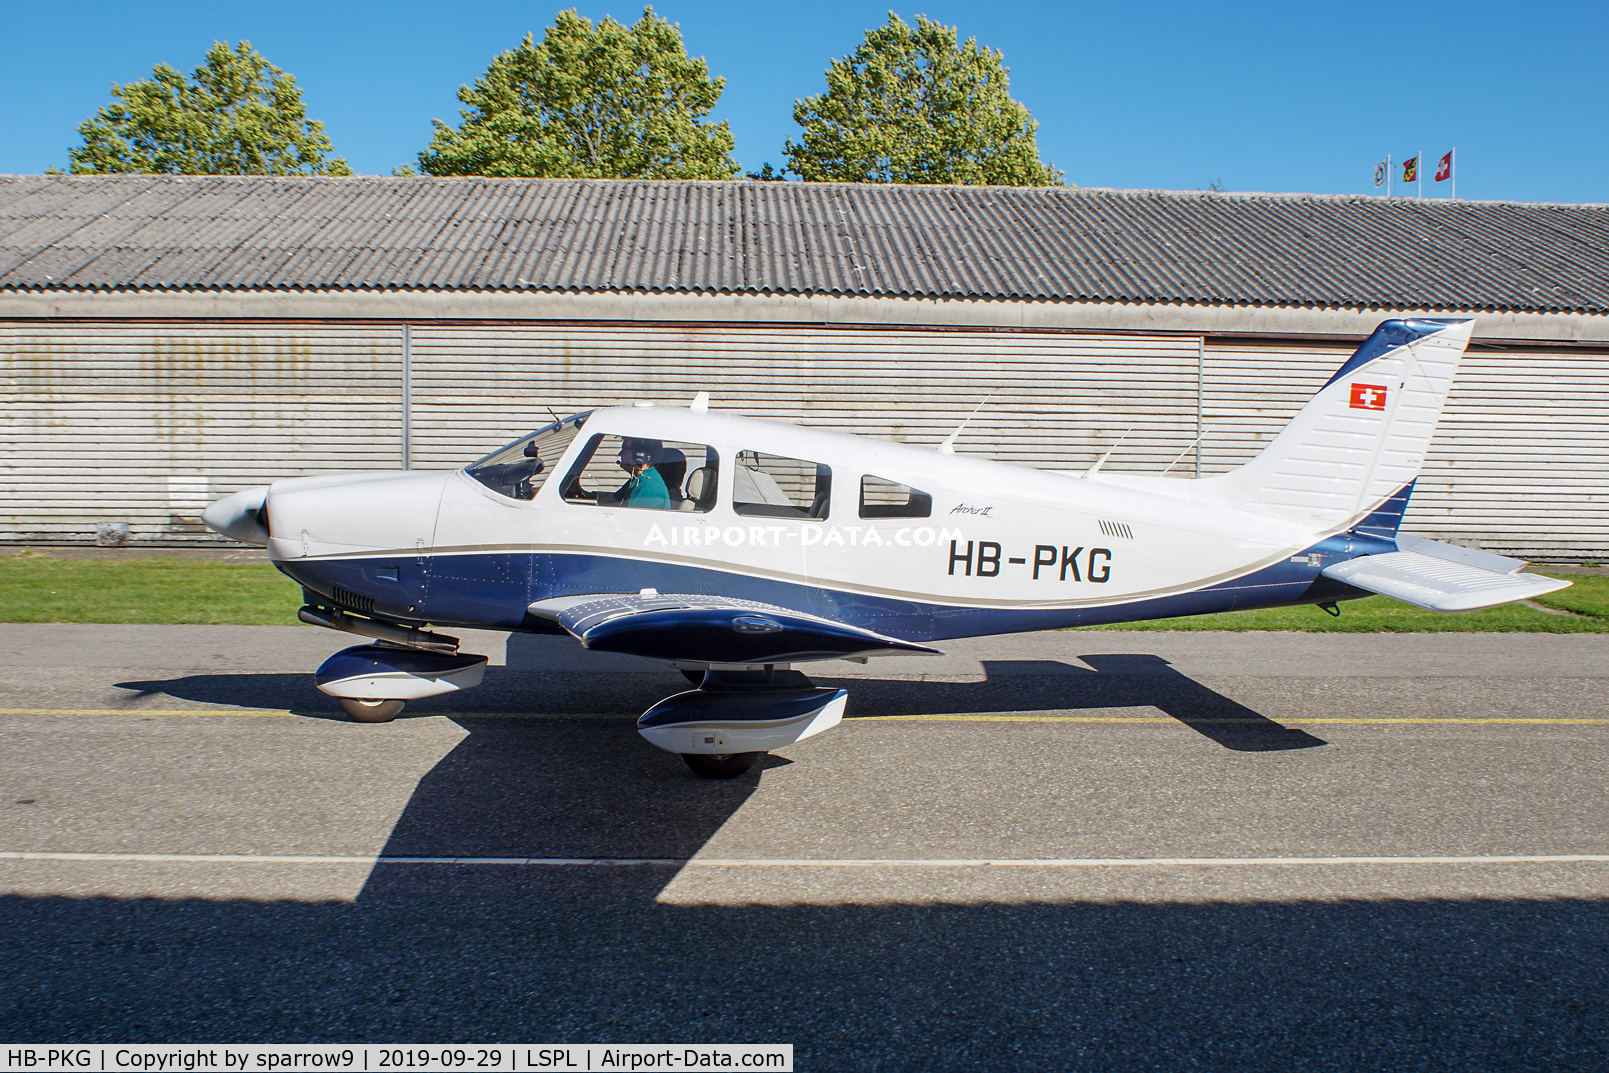 HB-PKG, 1986 Piper PA-28-181 Archer II C/N 2890008, At its base Langenthal-Bleienbach. New pain-scheme. HB-registered since 1986-10-28